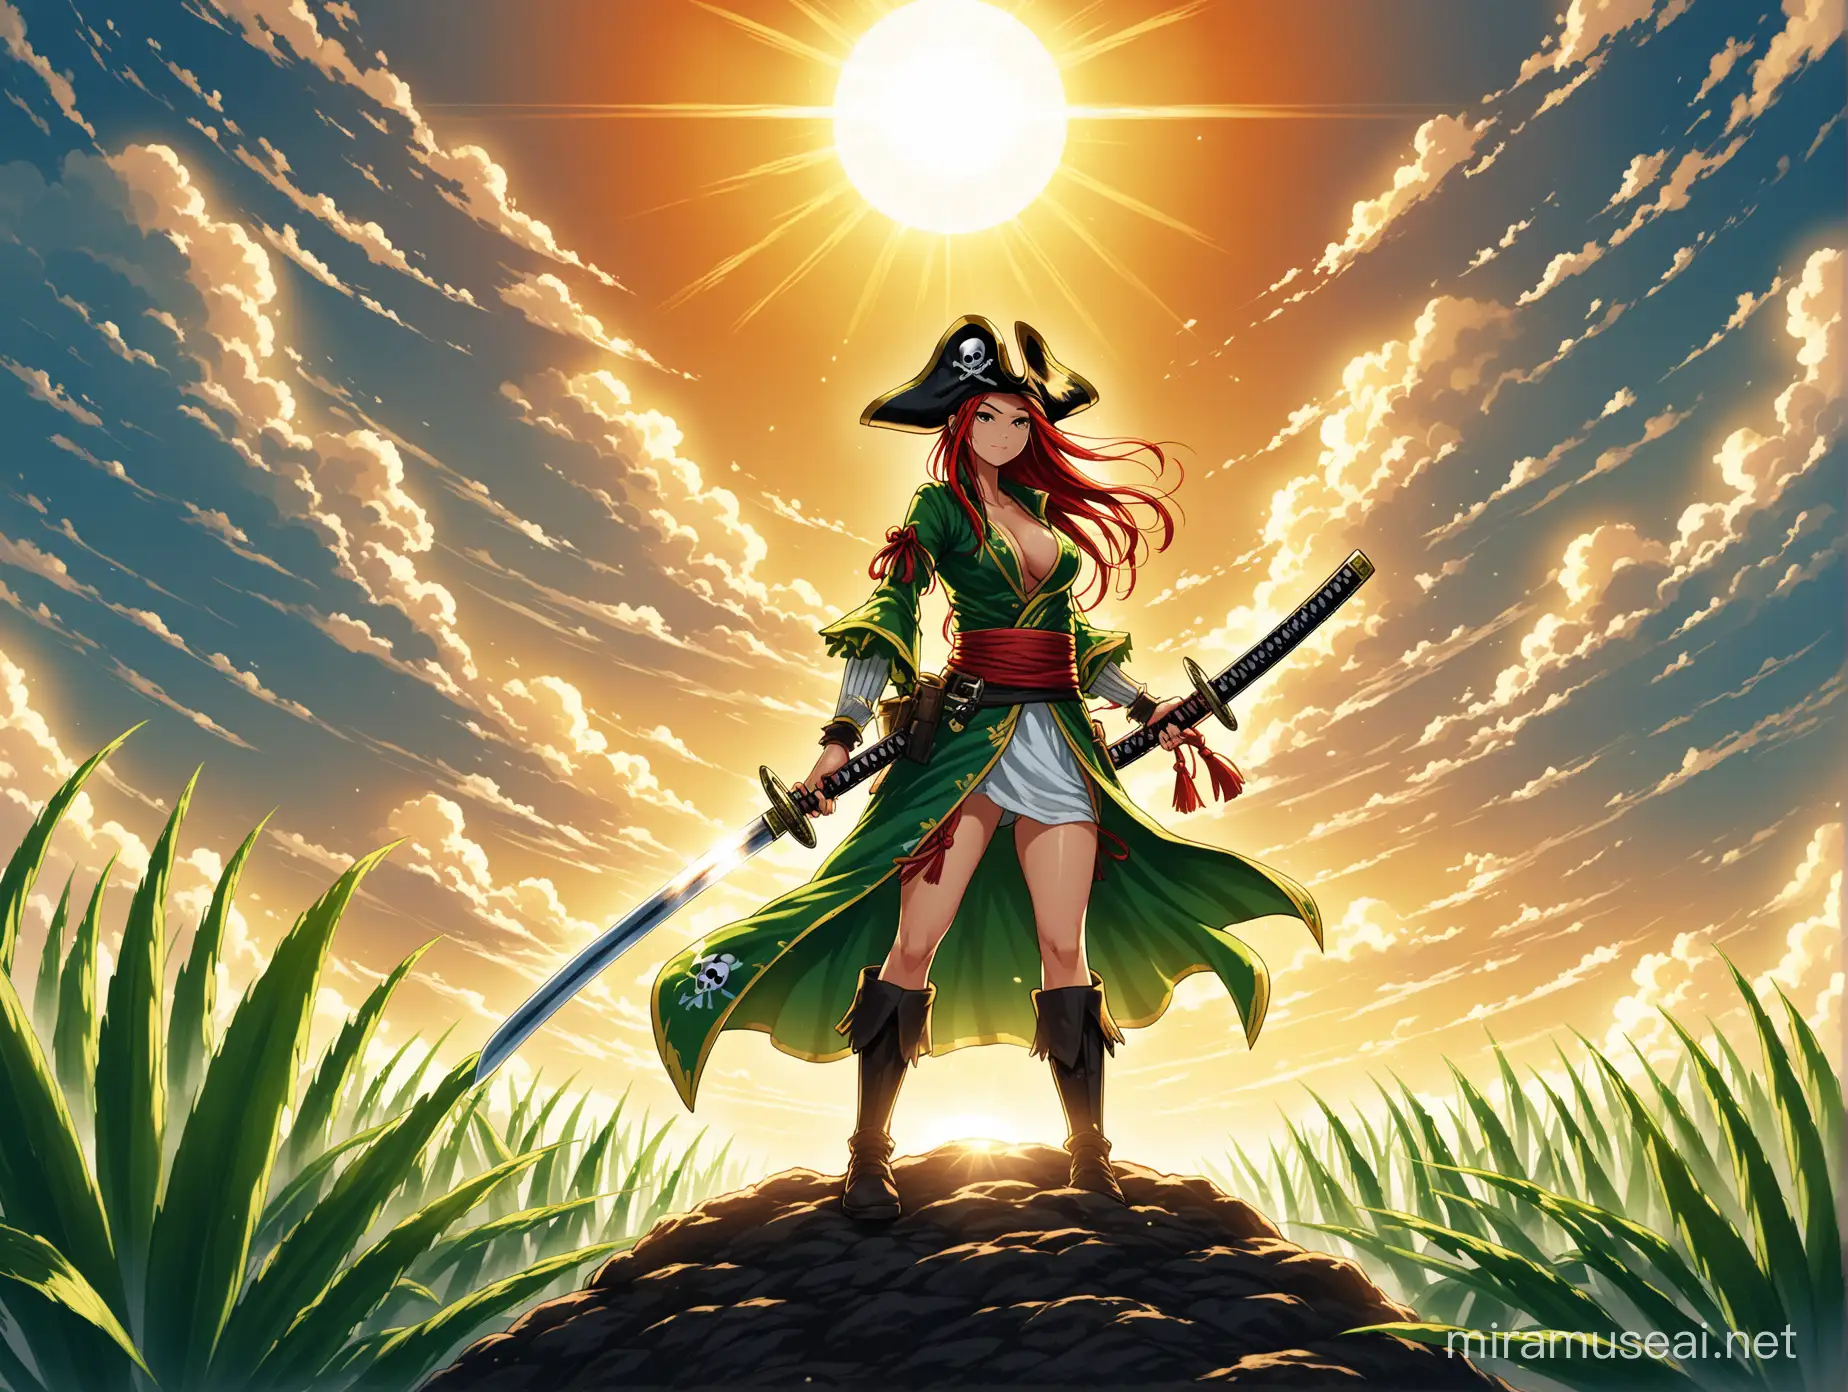 a lithe plant-woman is posing with a katana in front of enemy pirates as the sun shines through the clouds overhead